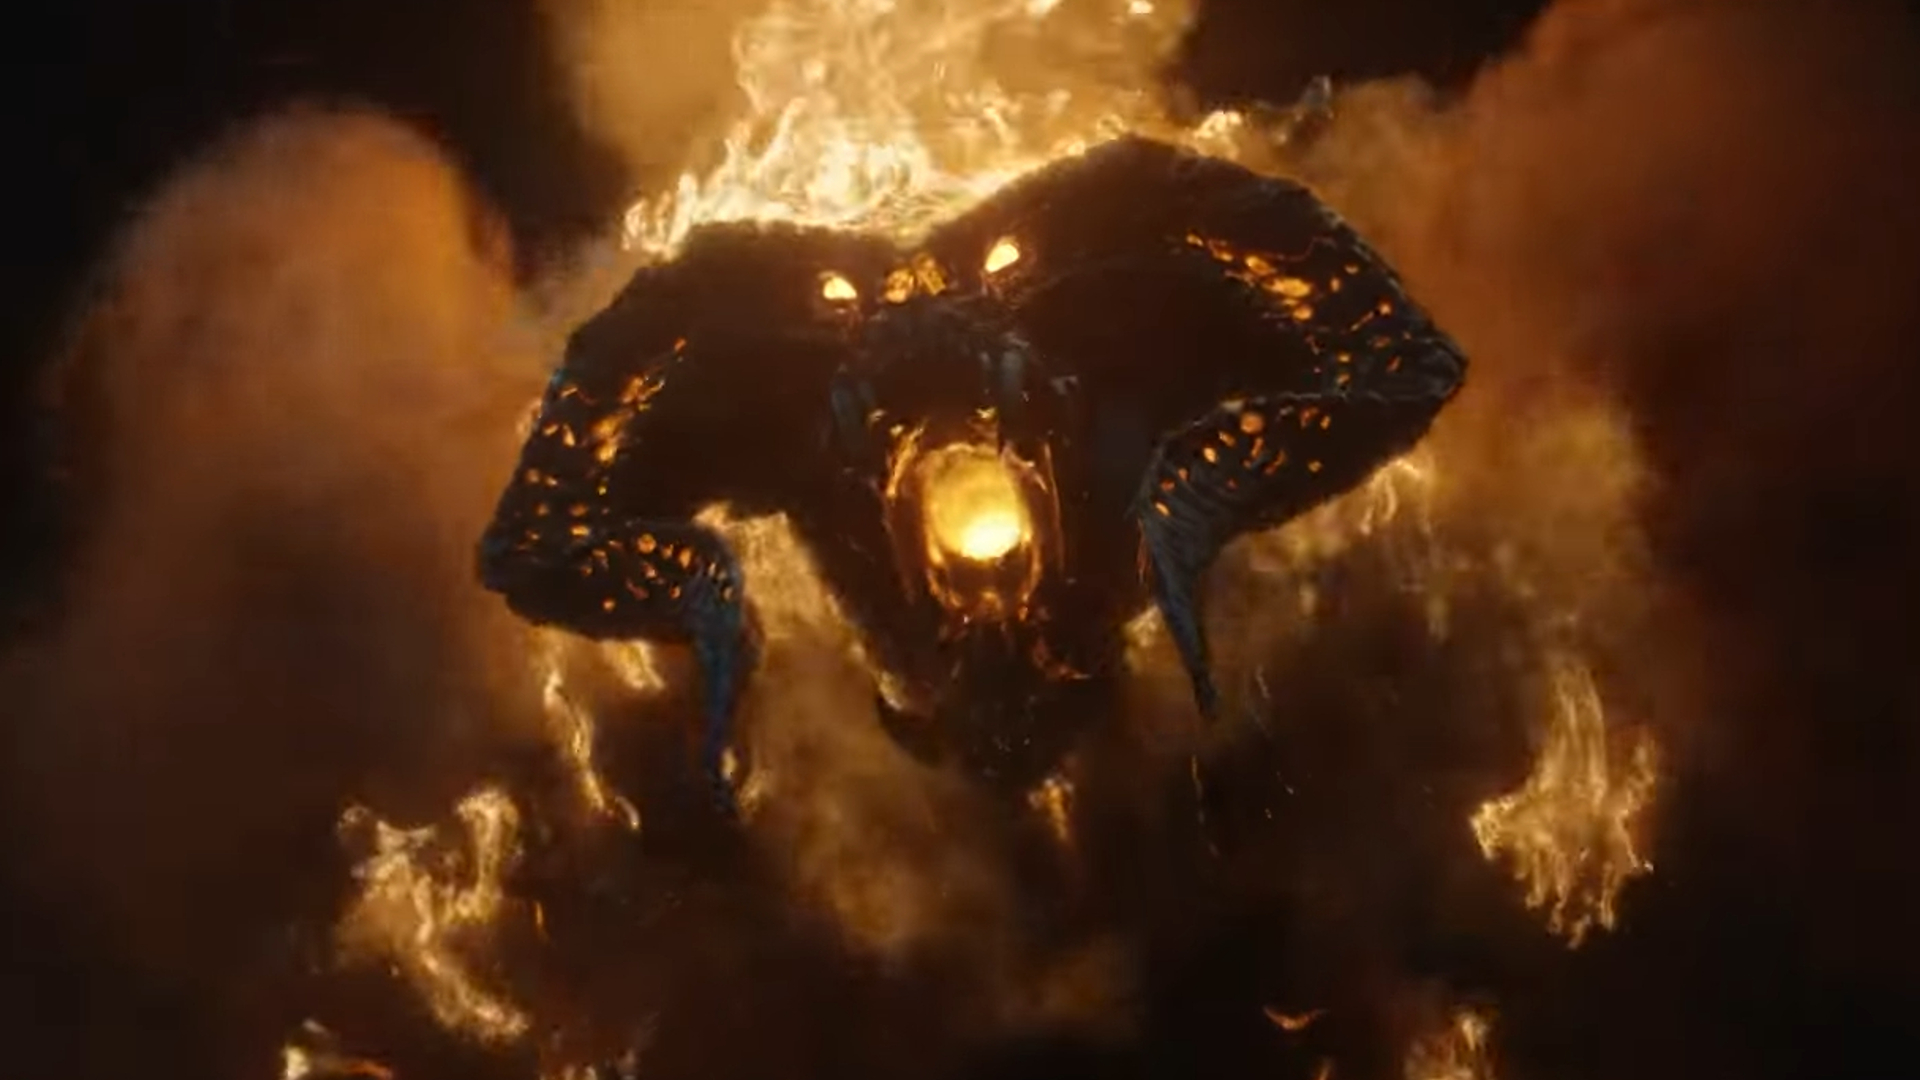 The Lord Of The Rings The Rings Of Power Trailer Teases Sauron & Balrog